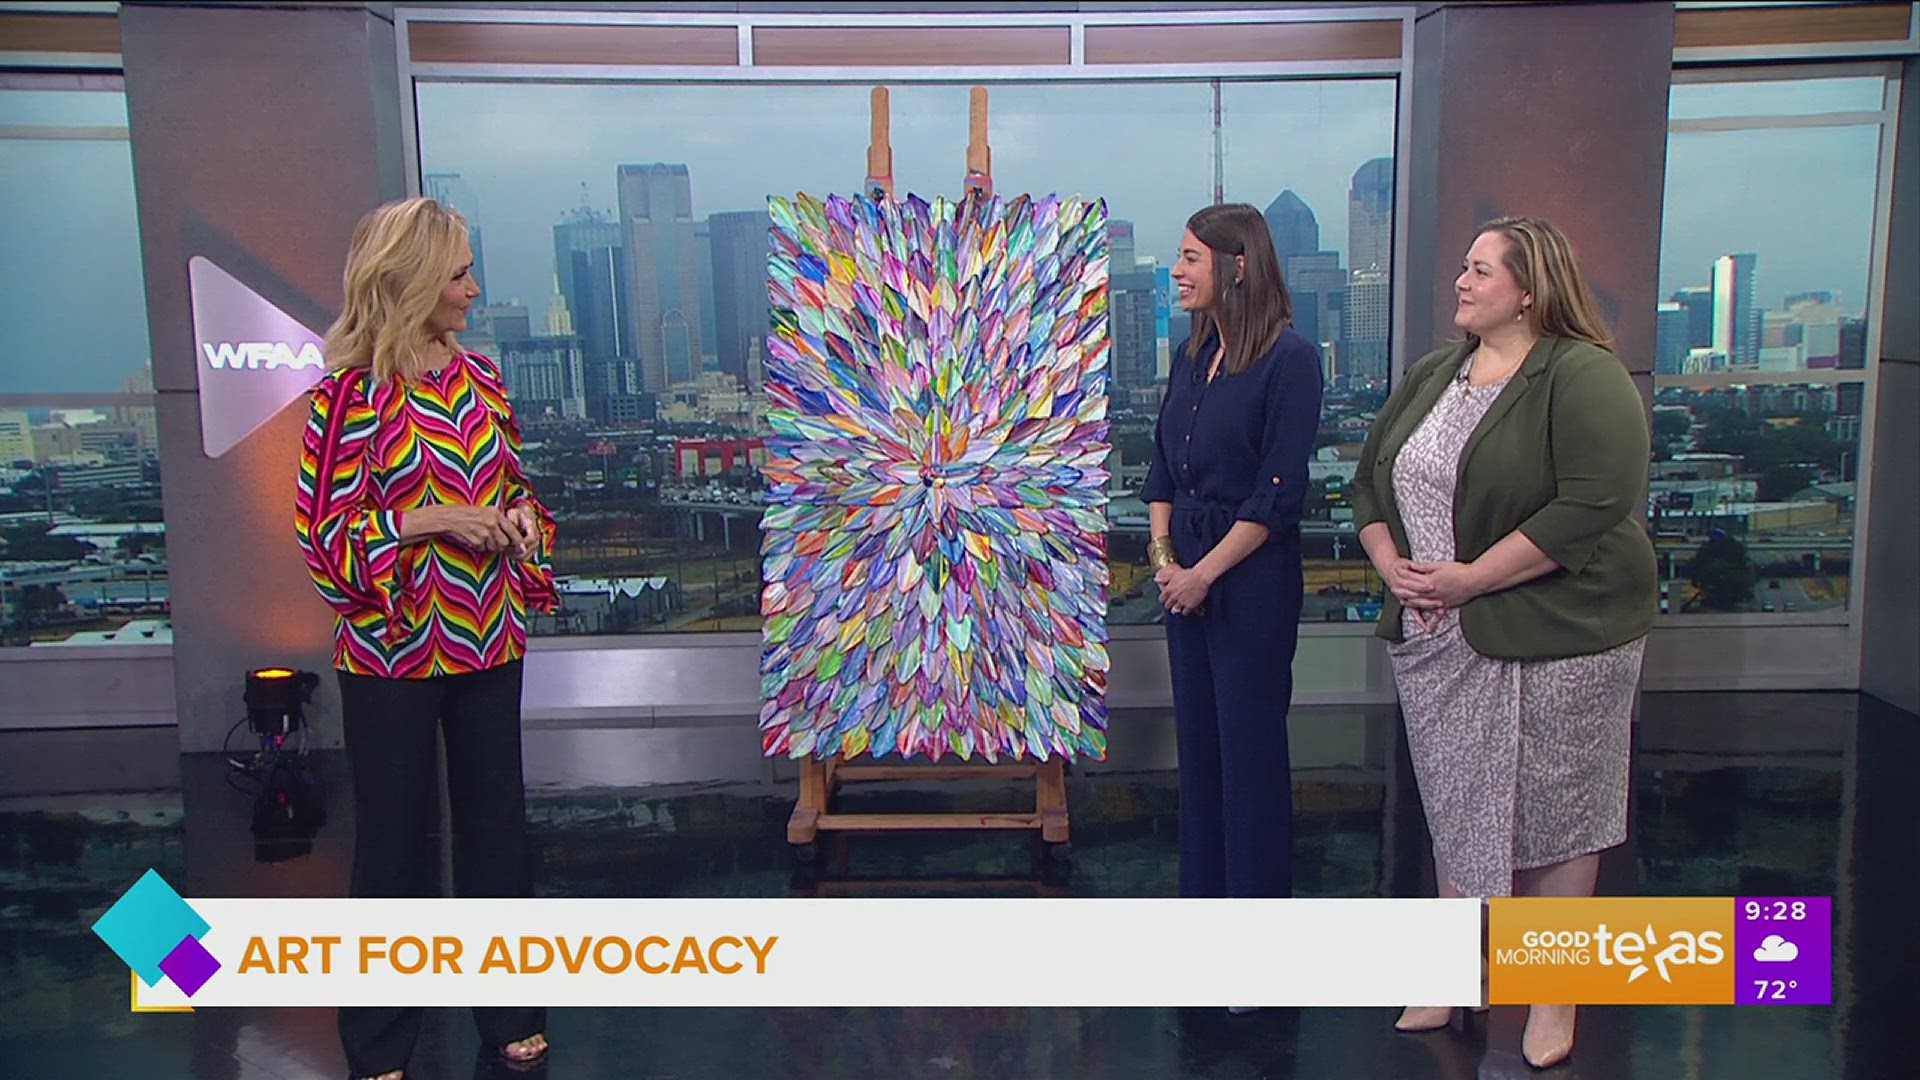 Dallas Children’s Advocacy Center’s Art for Advocacy fundraising event is Saturday, September 16